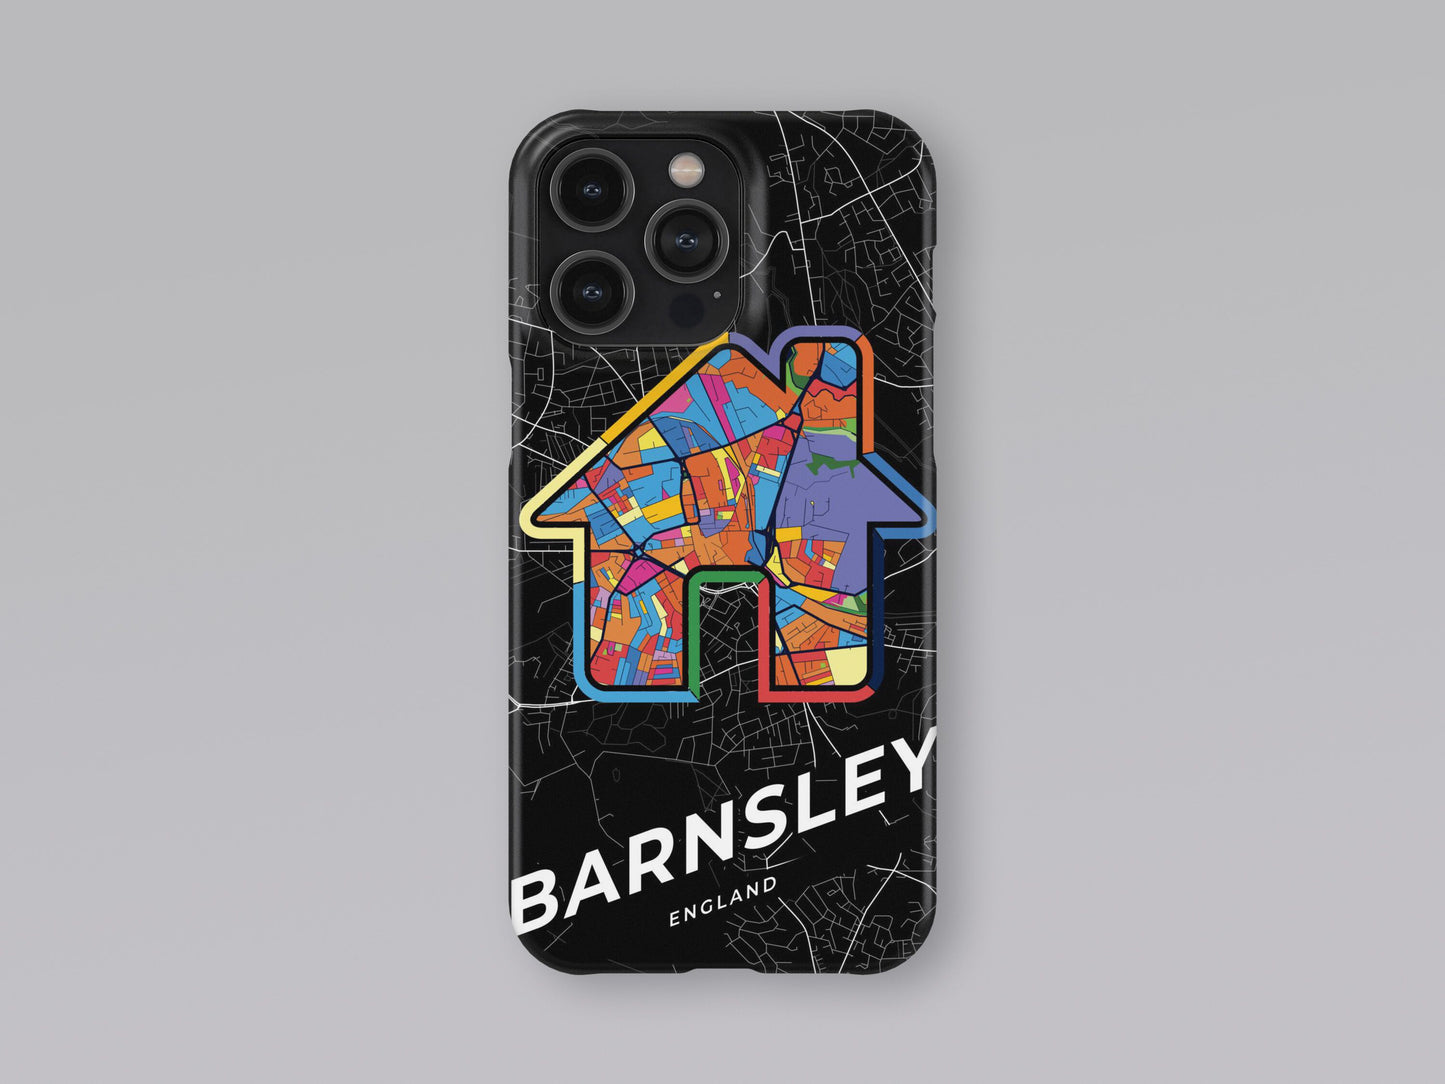 Barnsley England slim phone case with colorful icon. Birthday, wedding or housewarming gift. Couple match cases. 3